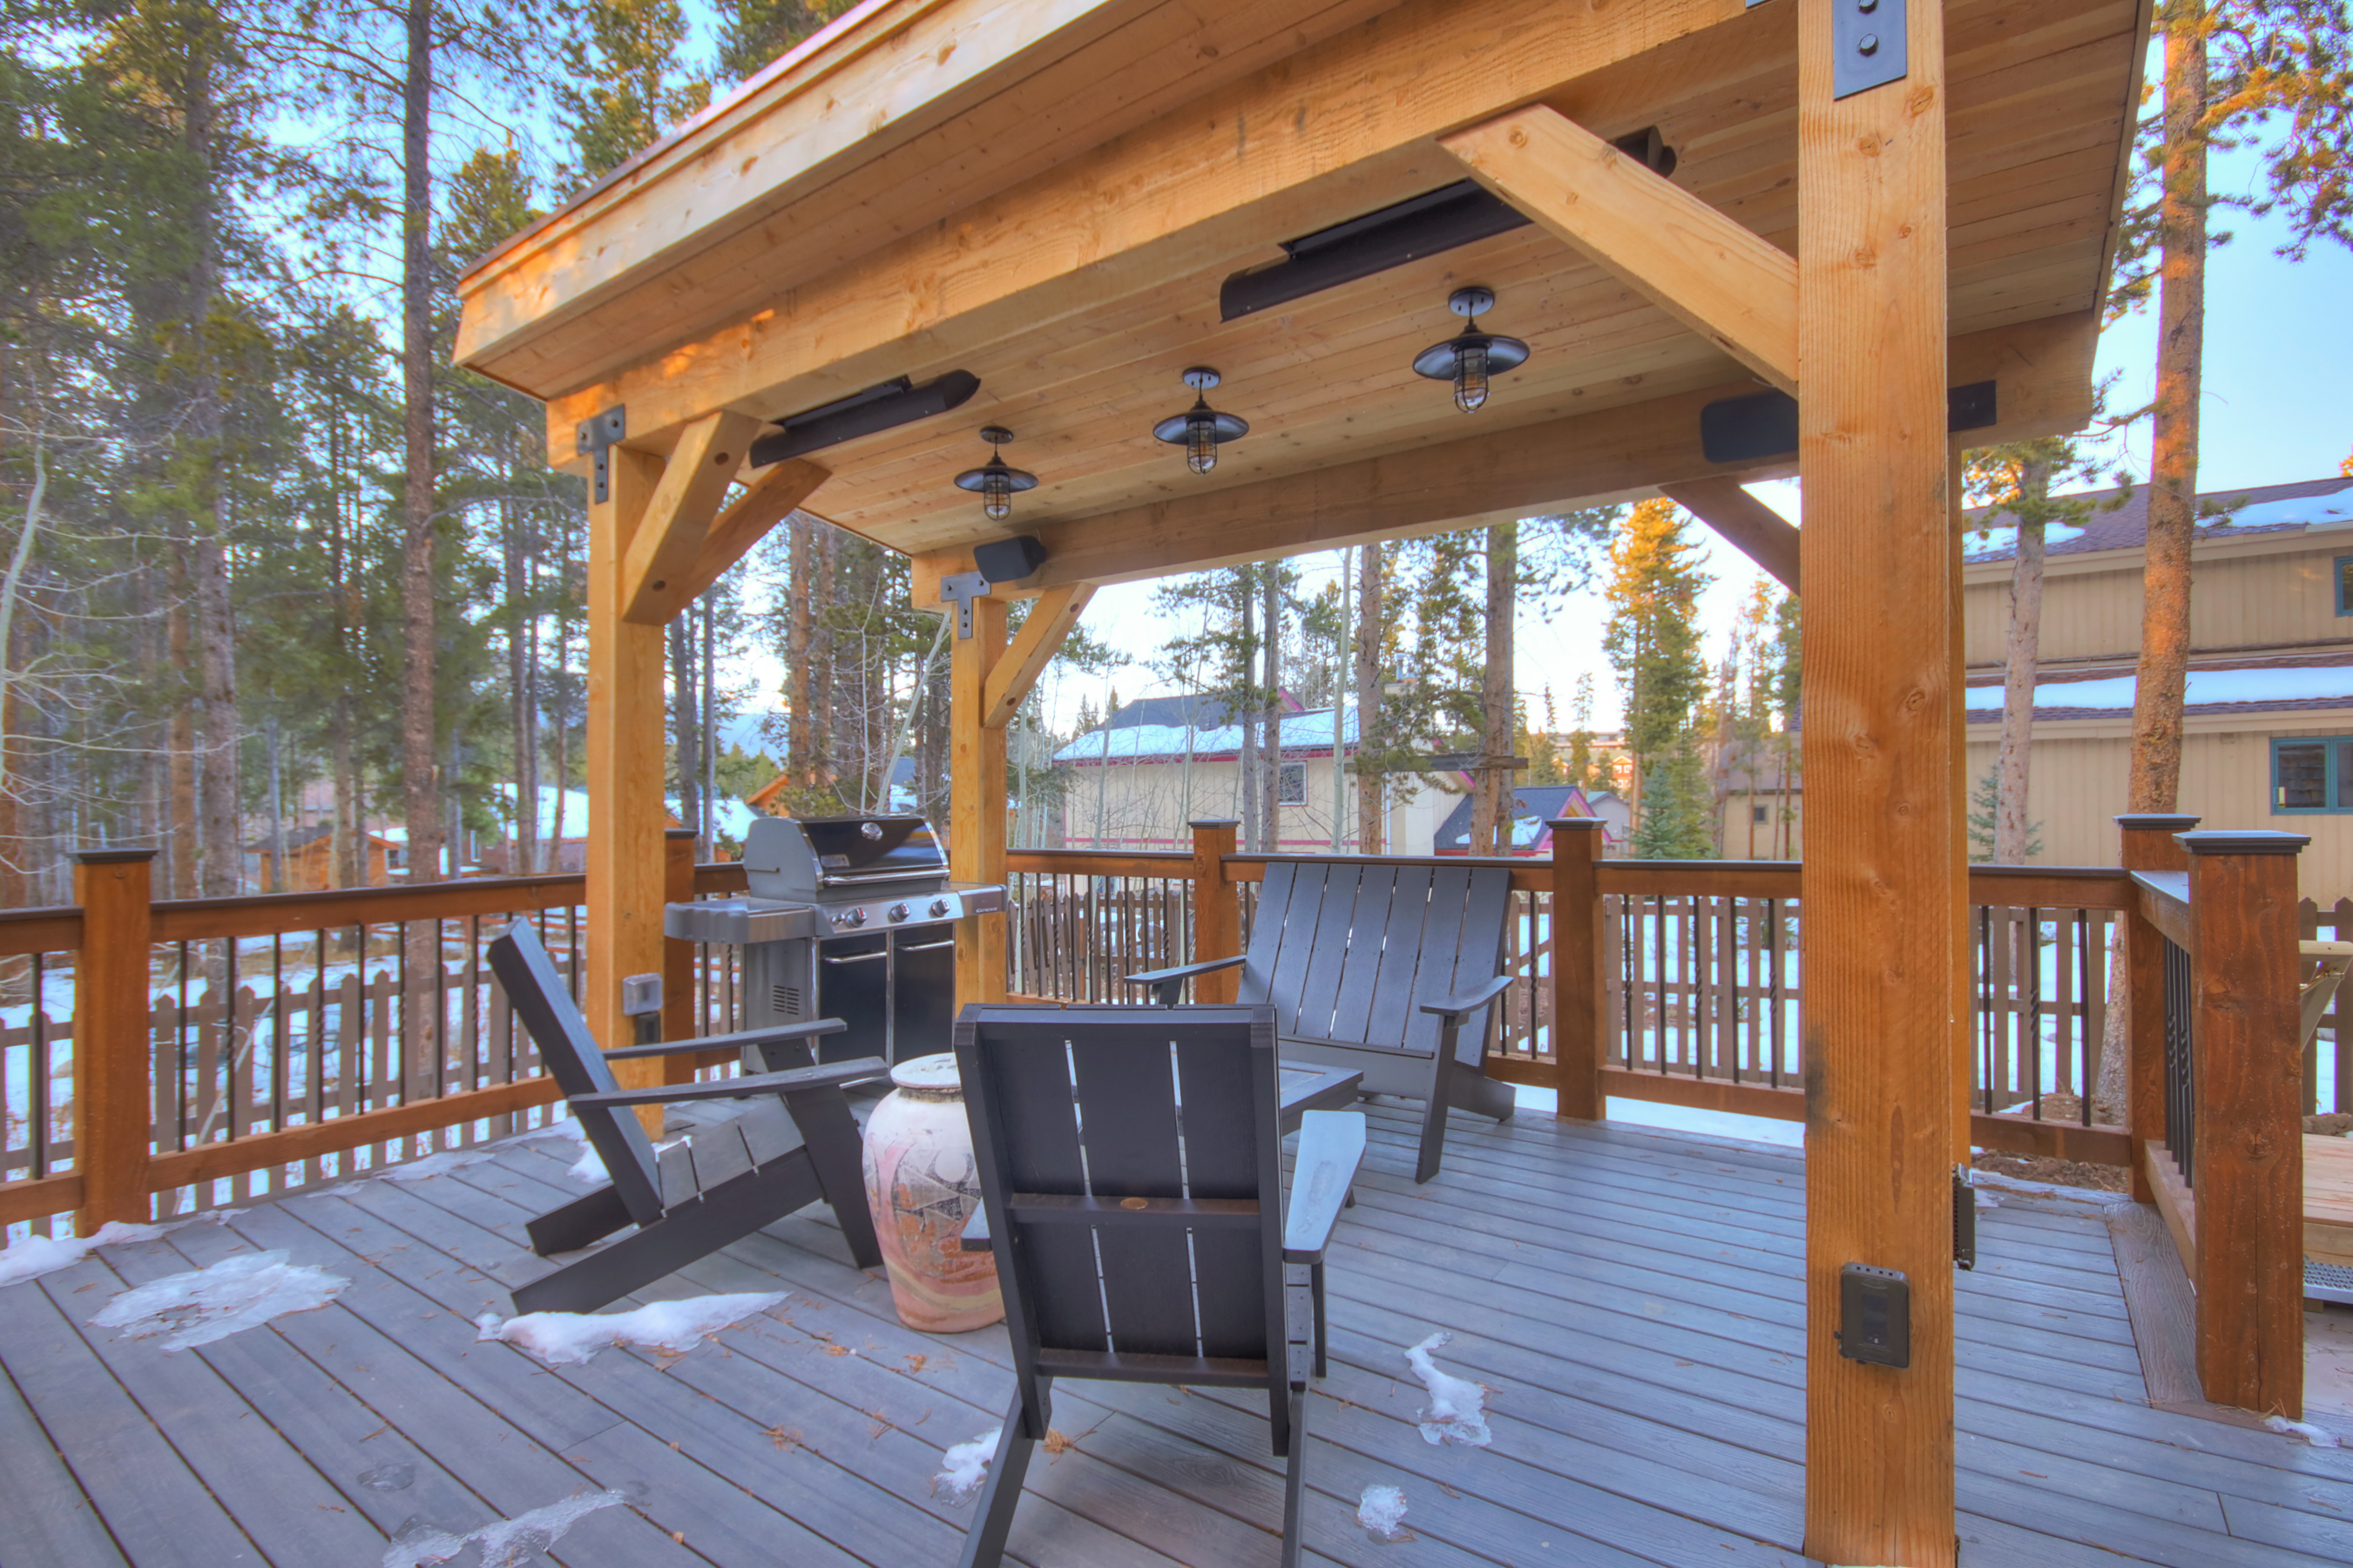 Deck with outdoor seating and gas grill